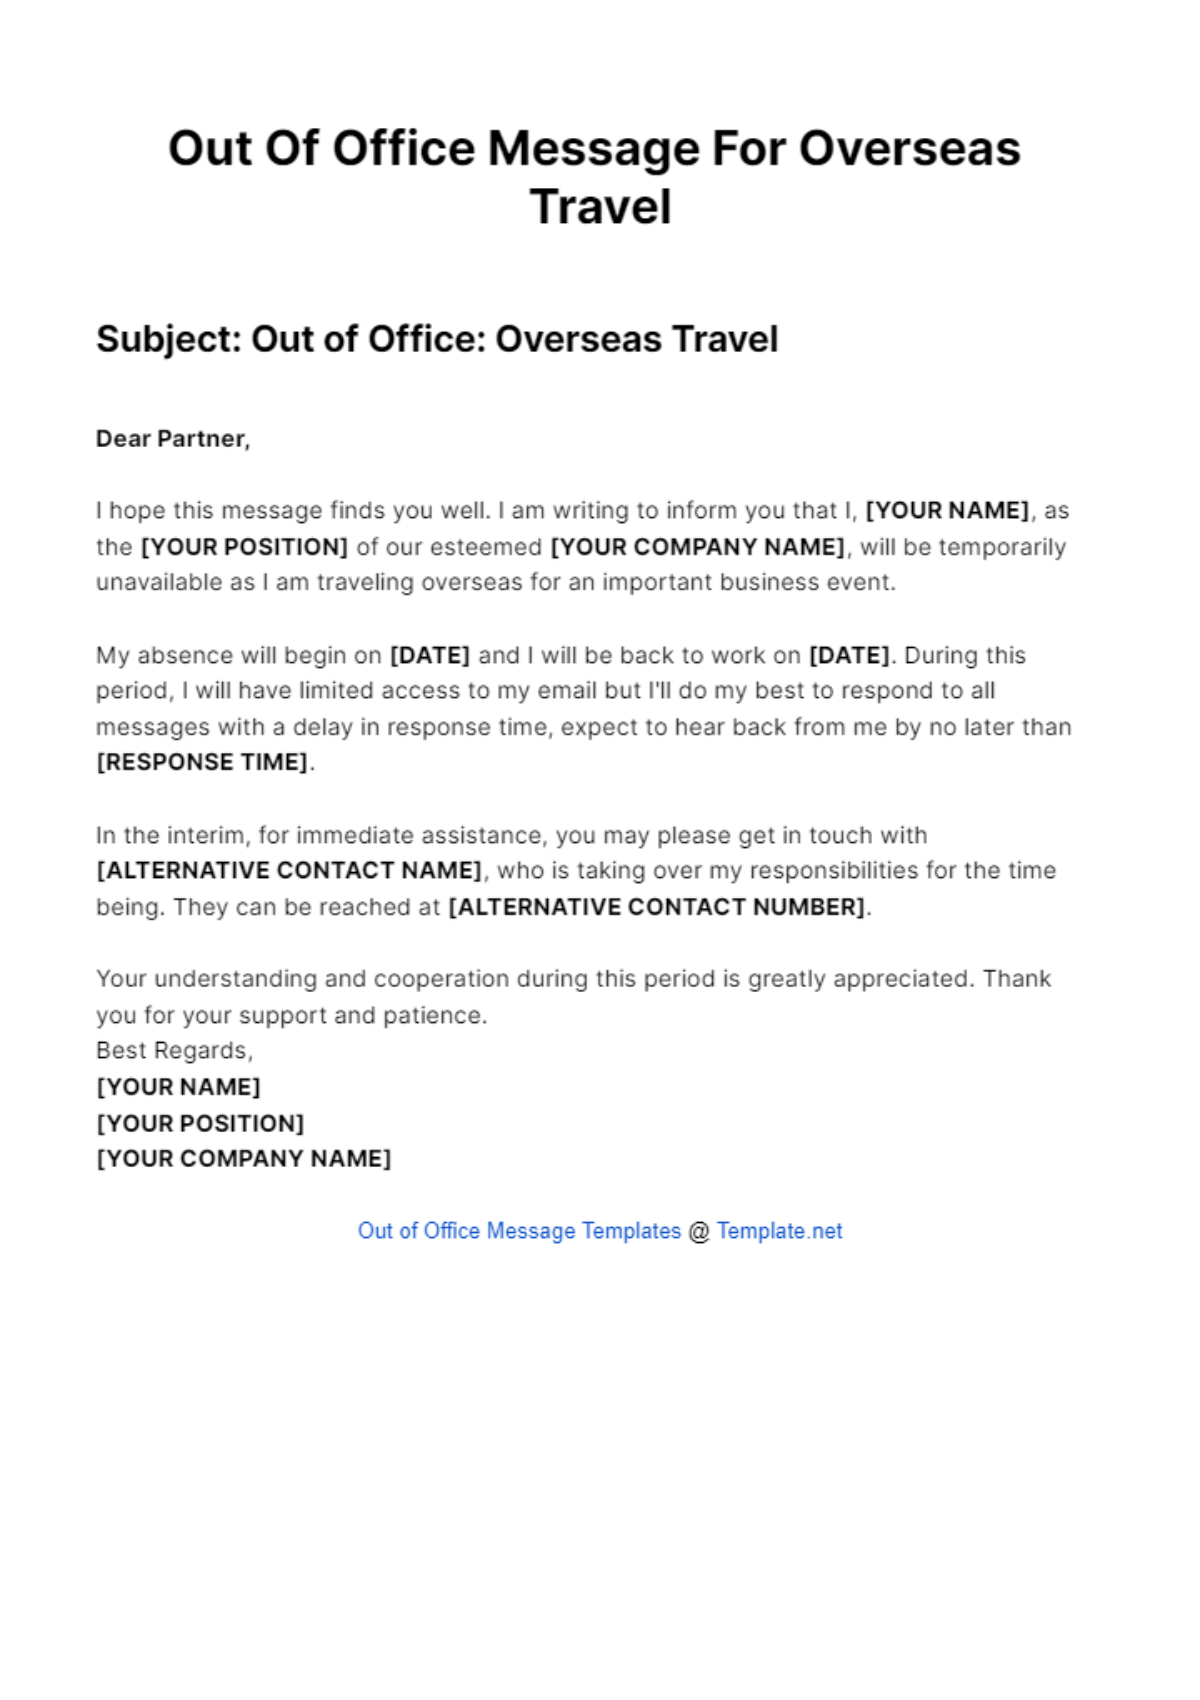 Out Of Office Message For Overseas Travel Template